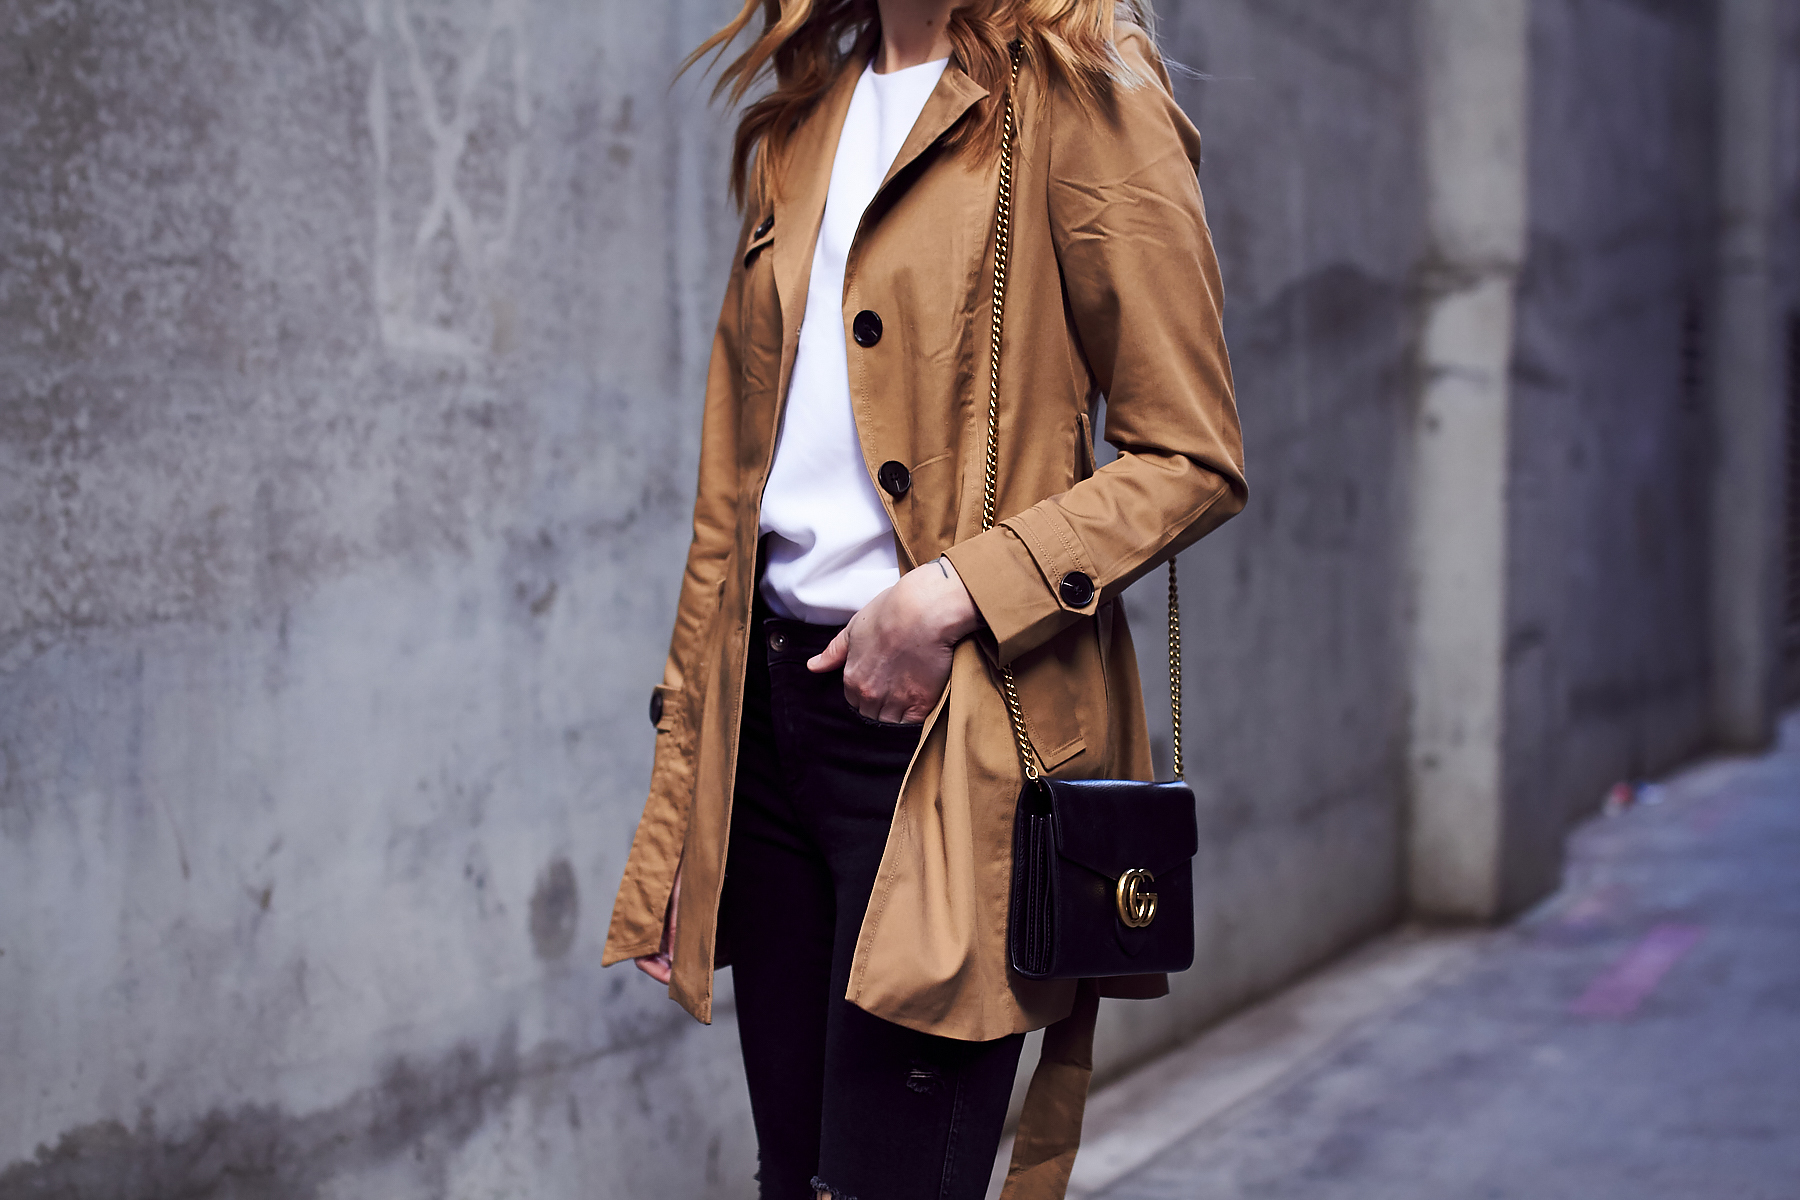 Fall Outfit, Spring Outfit, Trench Coat, Black Ripped Skinny Jeans, Gucci Marmont Handbag